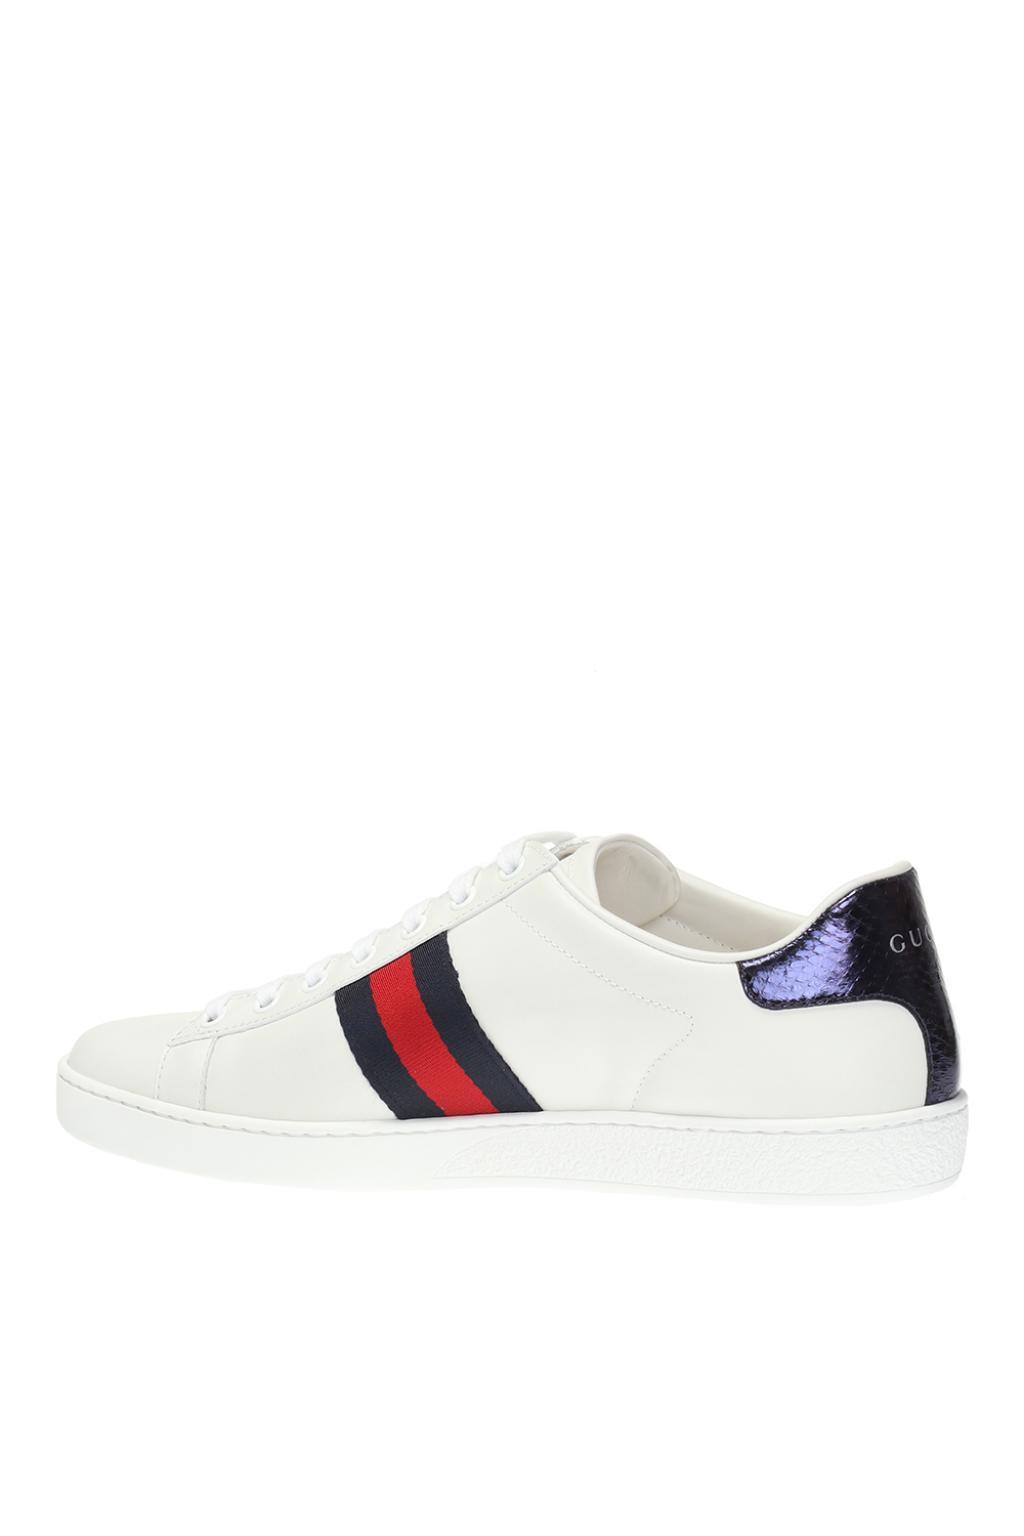 Handig vervagen les Gucci 'ace' Snake Motif Sneakers in White | Lyst